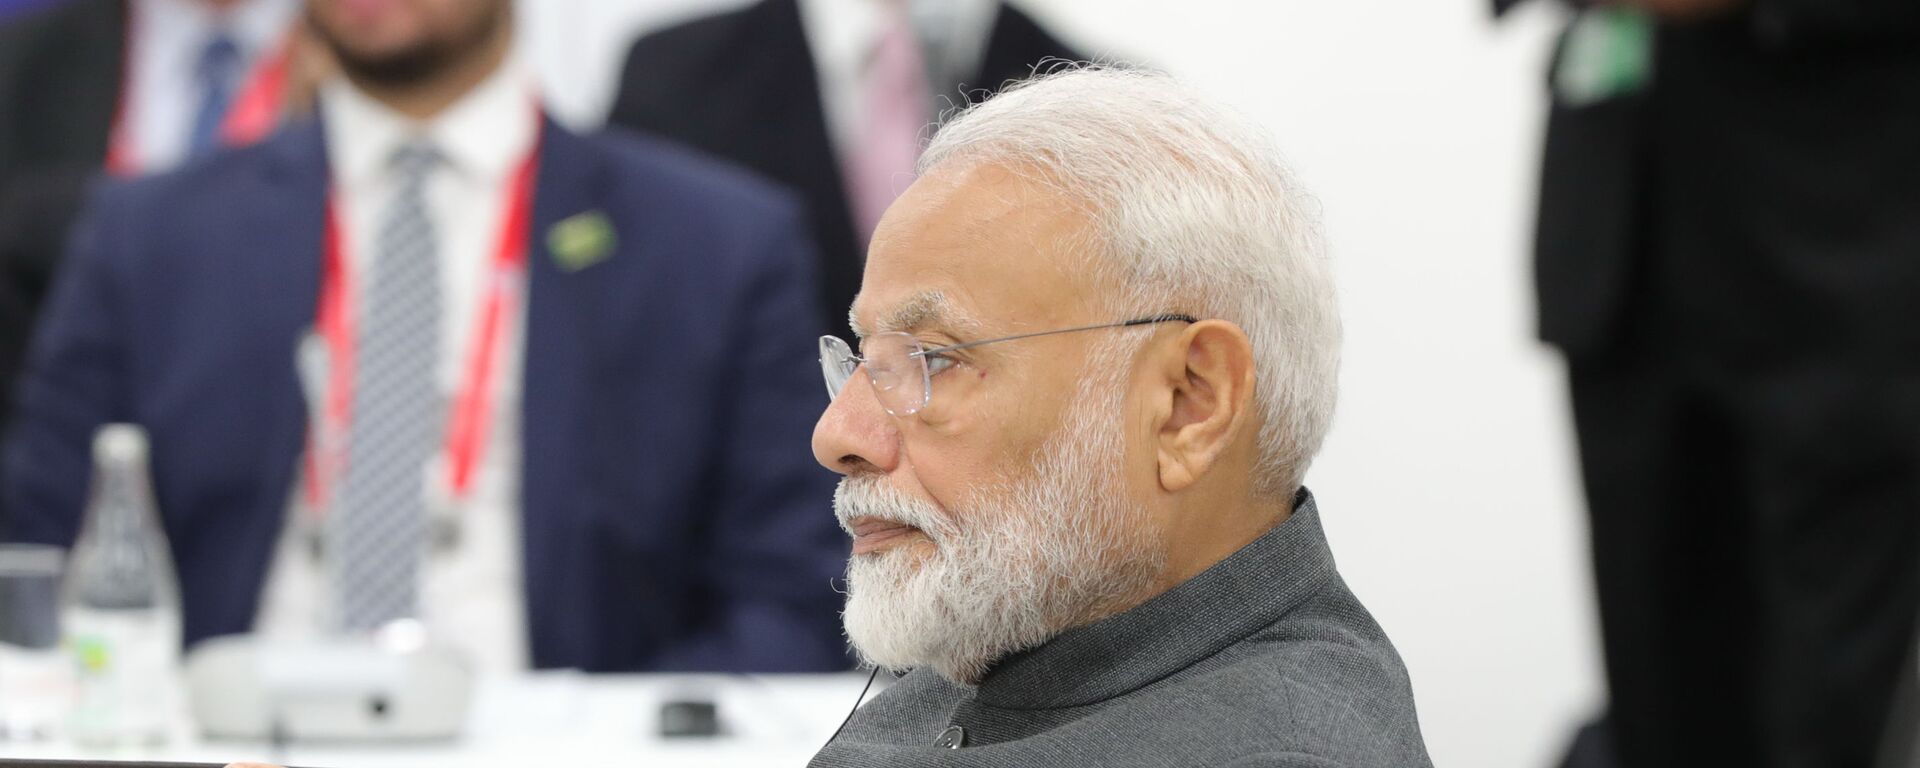 India's Prime Minister Narendra Modi attends a meeting of the BRICS heads of state on the sidelines of the Group of 20 (G20) leaders summit in Osaka, Japan - Sputnik International, 1920, 01.11.2022